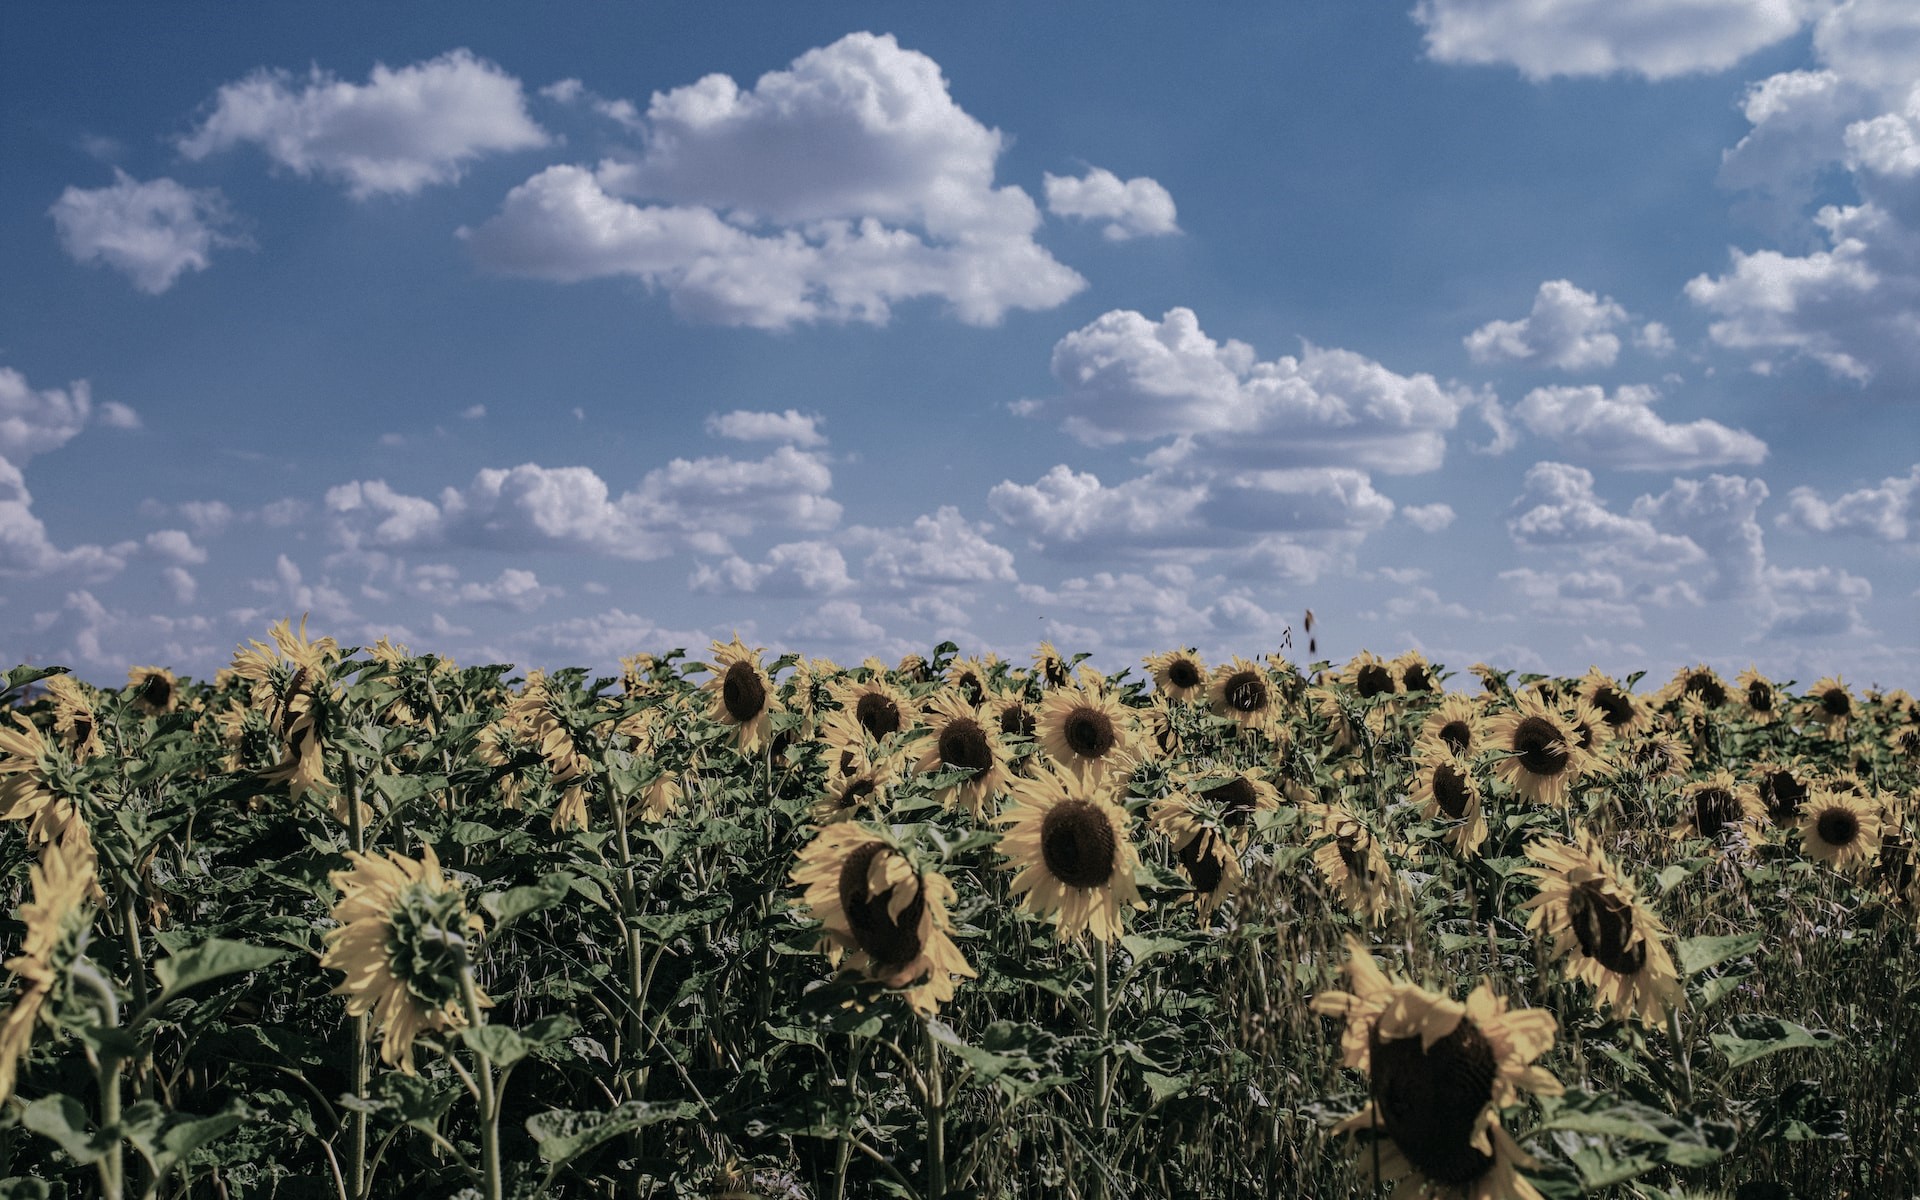 A darkened image of a field of yellow sunflowers under a blue sky